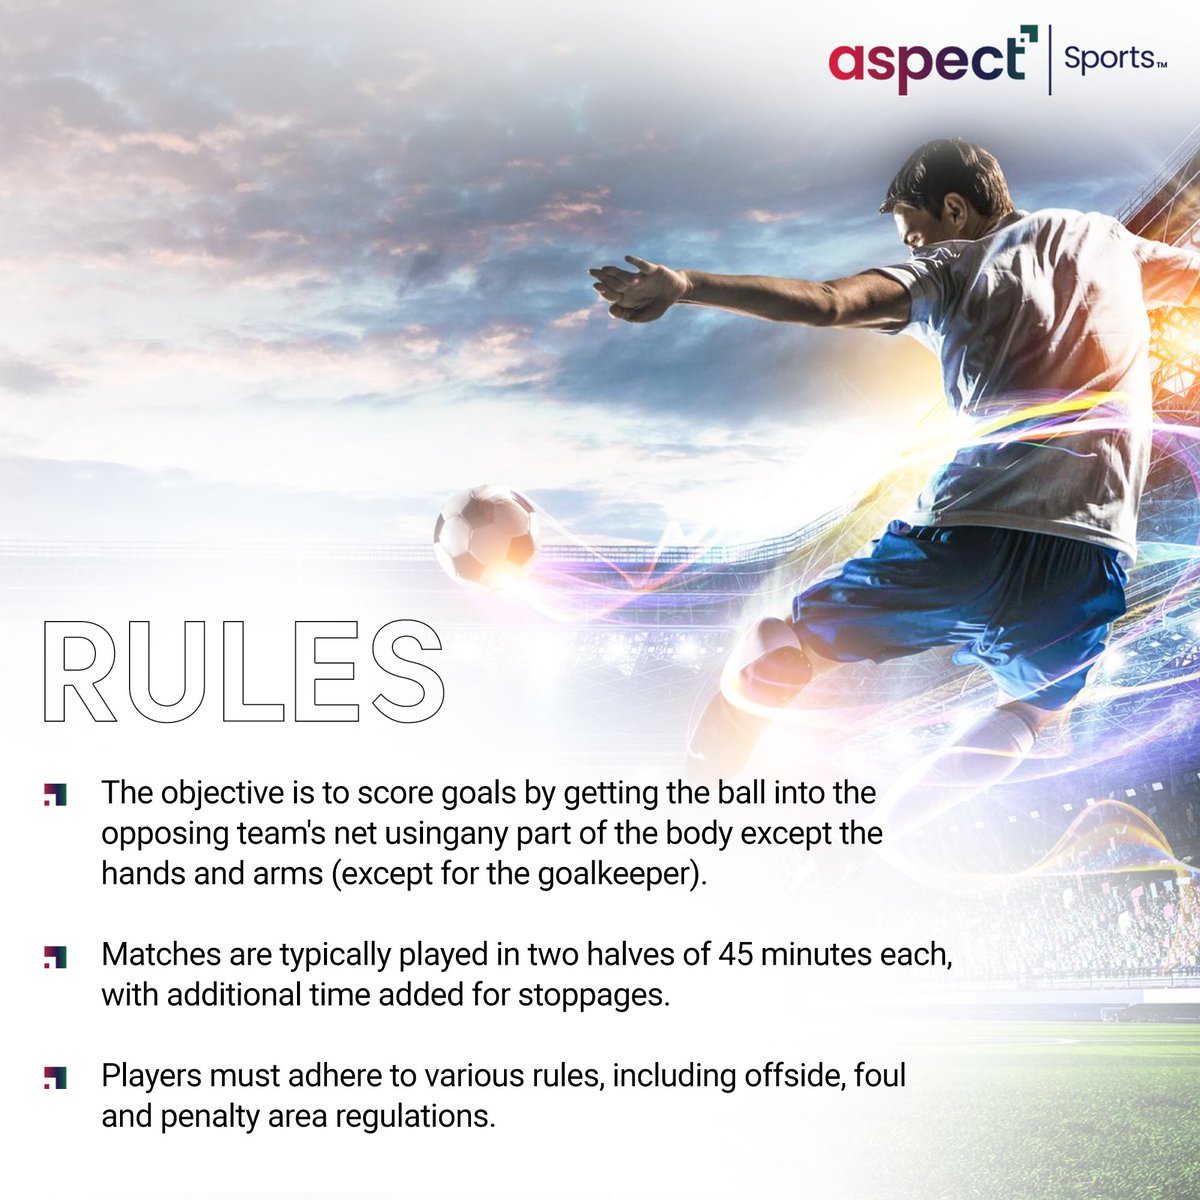 Football is a game of rules and rhythm. At Aspect Sports, we believe in playing fair, staying disciplined, and seizing every opportunity to score.

#Aspect #AspectSports #PlayByTheRule #RulesOfFootball #Football #FootballChampionship #Sports #SportsIndustry #SportsManagement